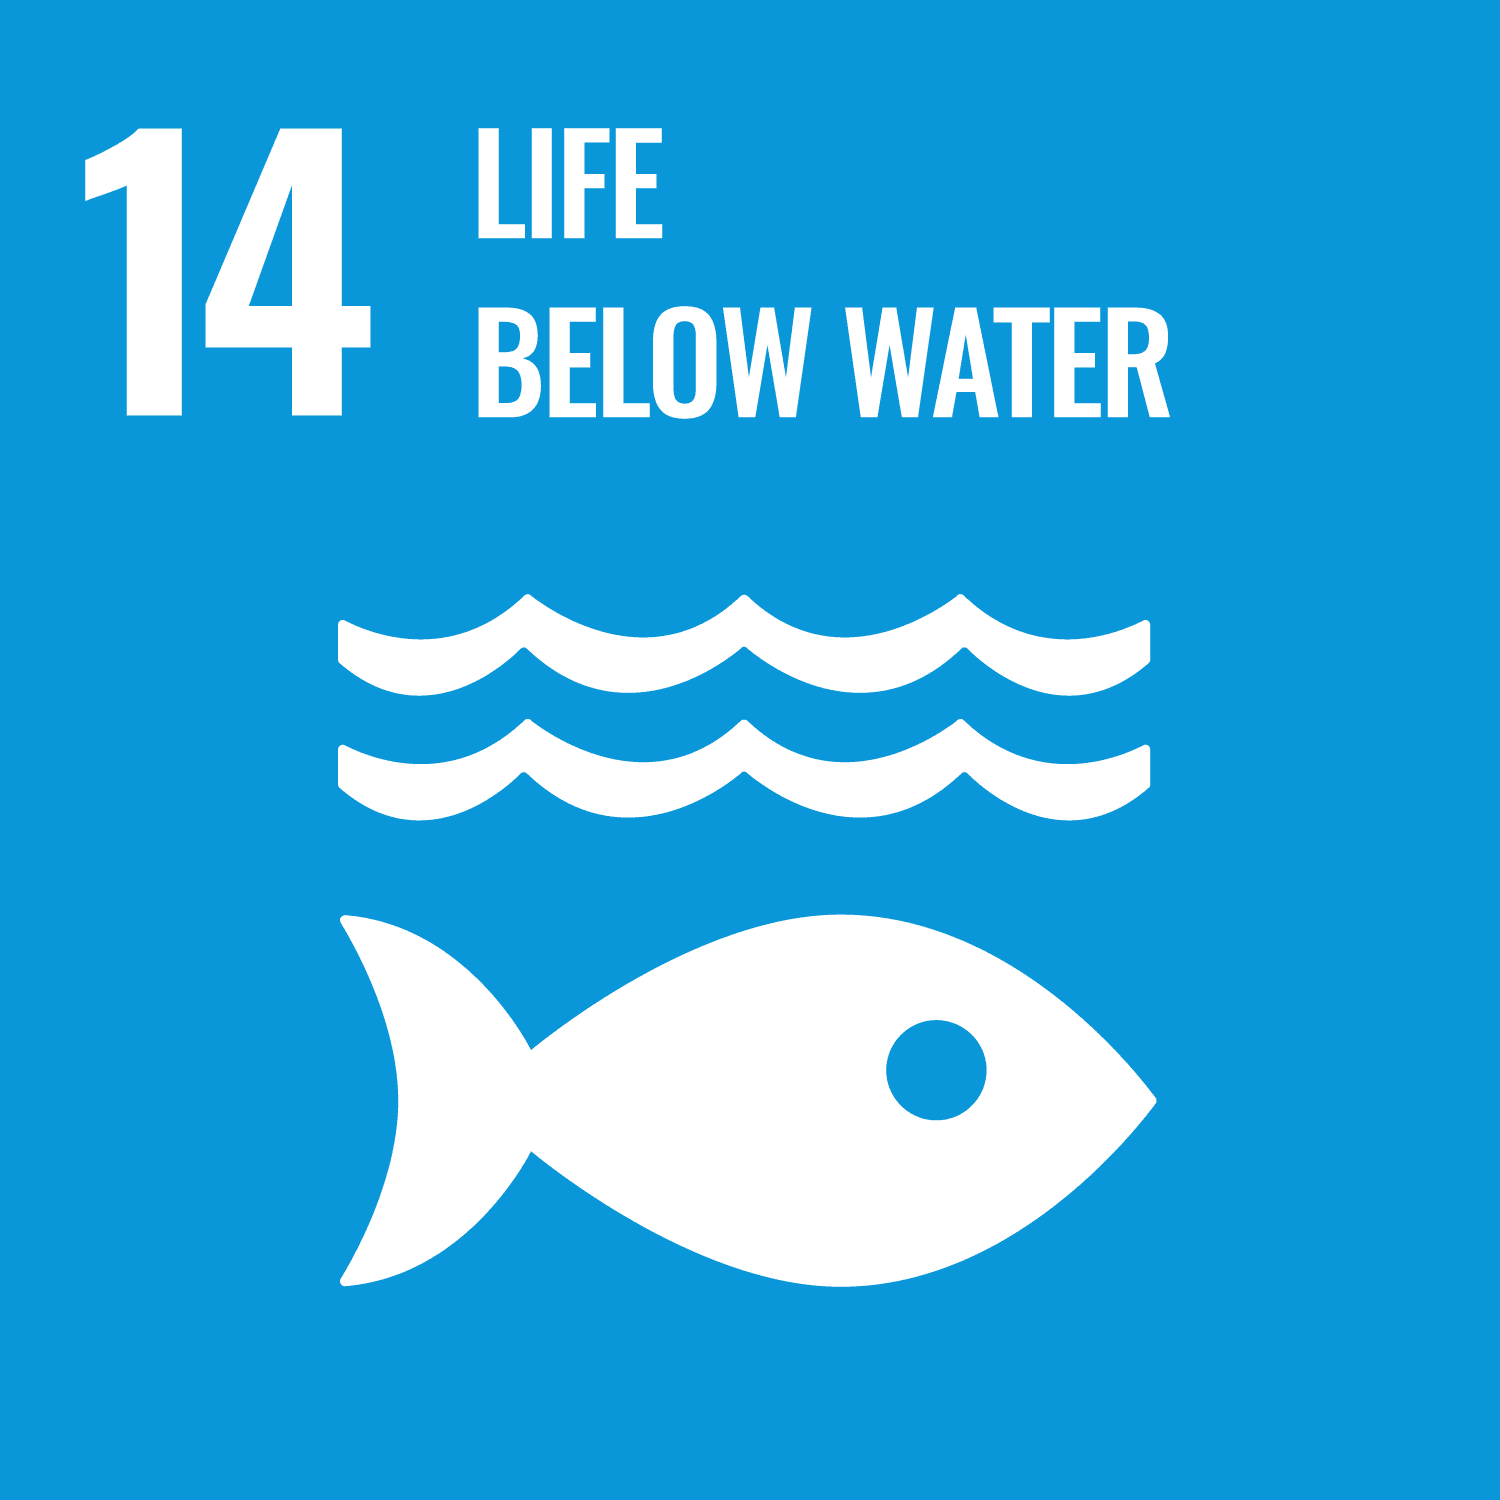 Graphic image of a fish and some waves saying '14 Life below water' reflecting Sustainable Development Goal (SDG) or Global Goal 14